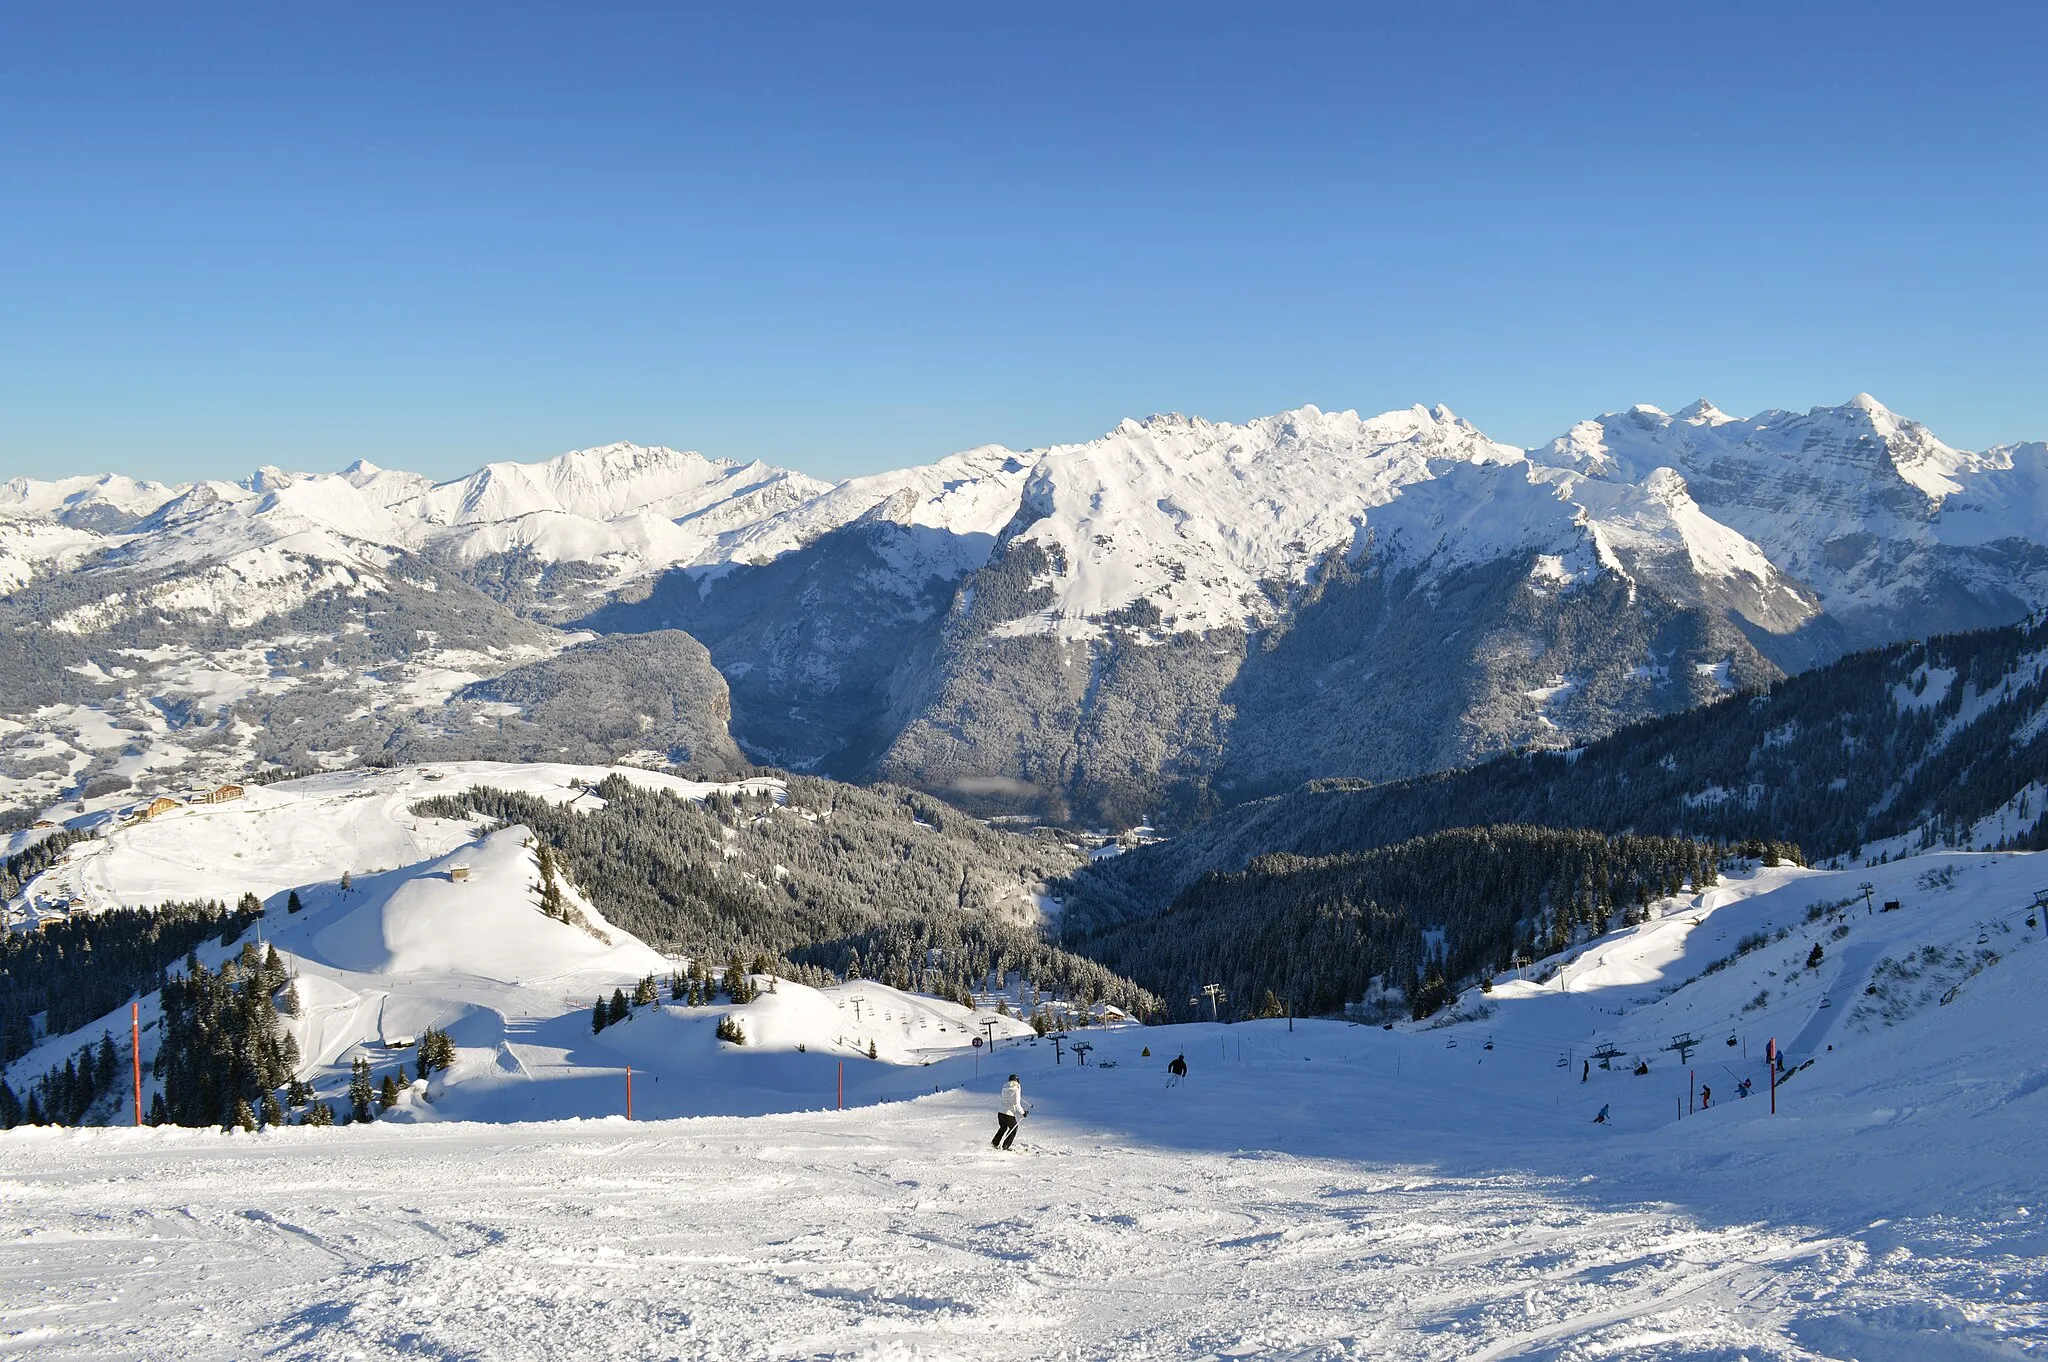 Photo showing: A winter's view from below the Tête des Saix, at the intersection of the Marmotte and Perce-neige slopes, towards Samoëns 1600 (located far left), Samoëns Village (located center, hidden in the valley), and the mountains beyond.